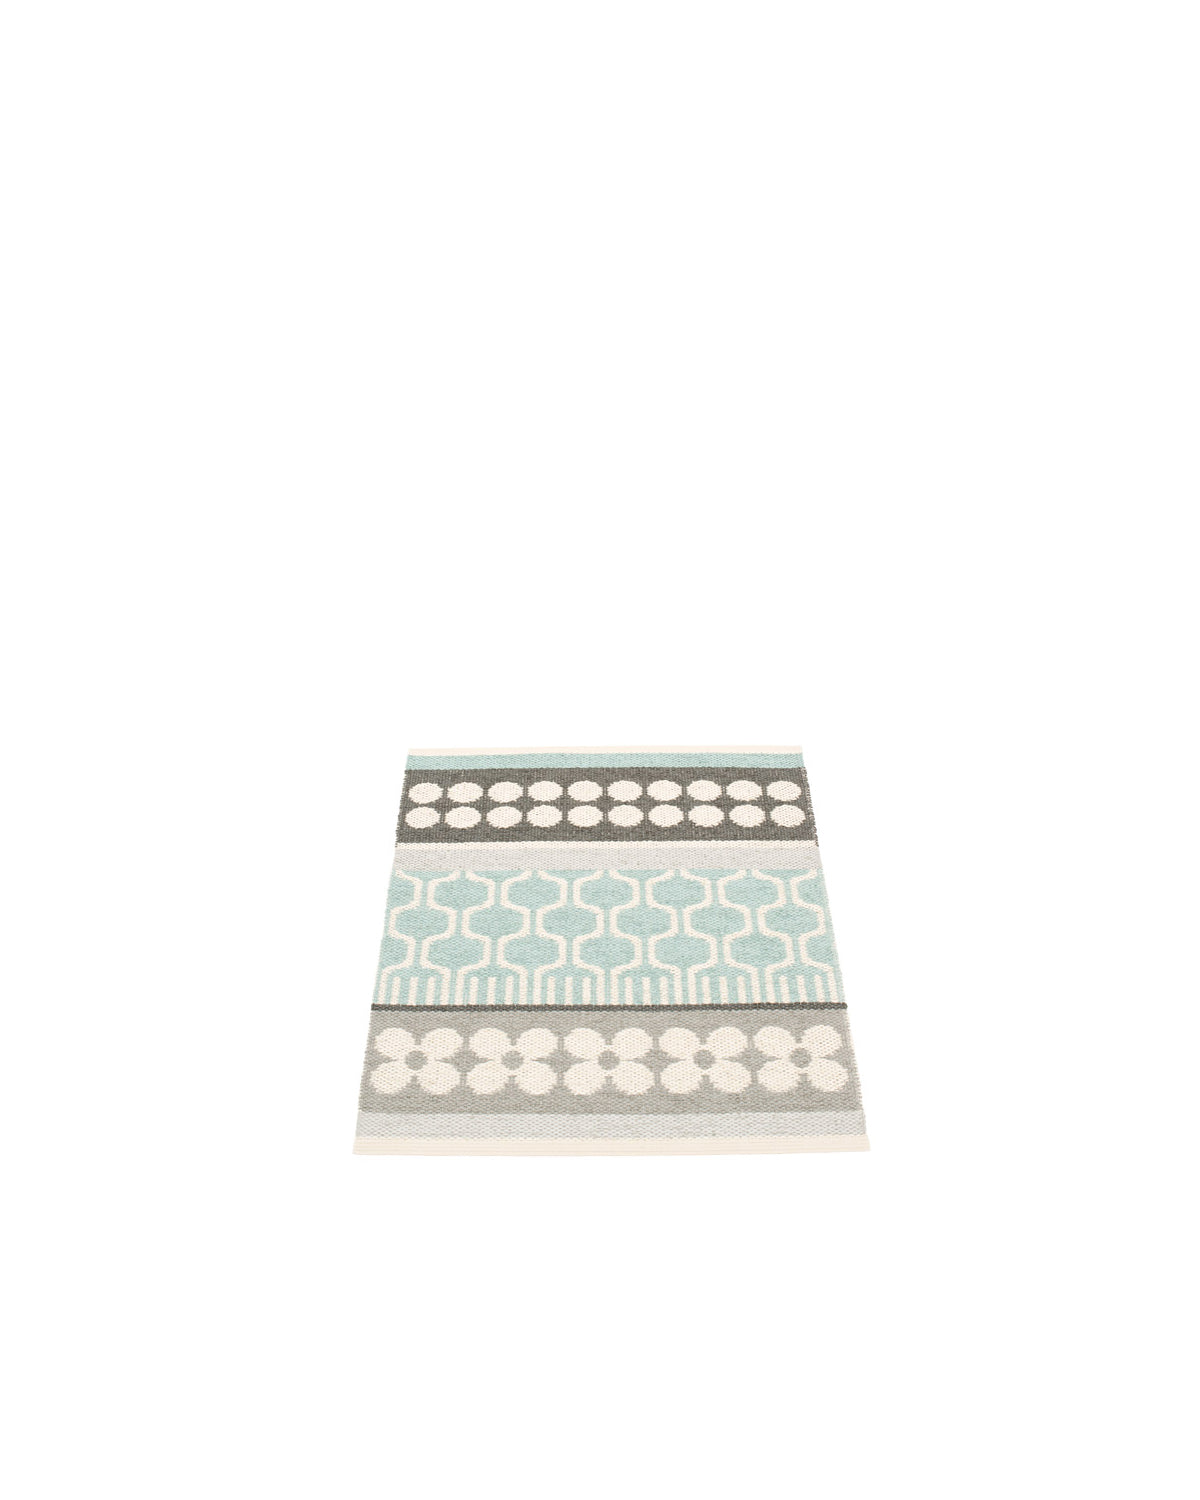 Pappelina Rug ASTA Pale Turquoise  image 1